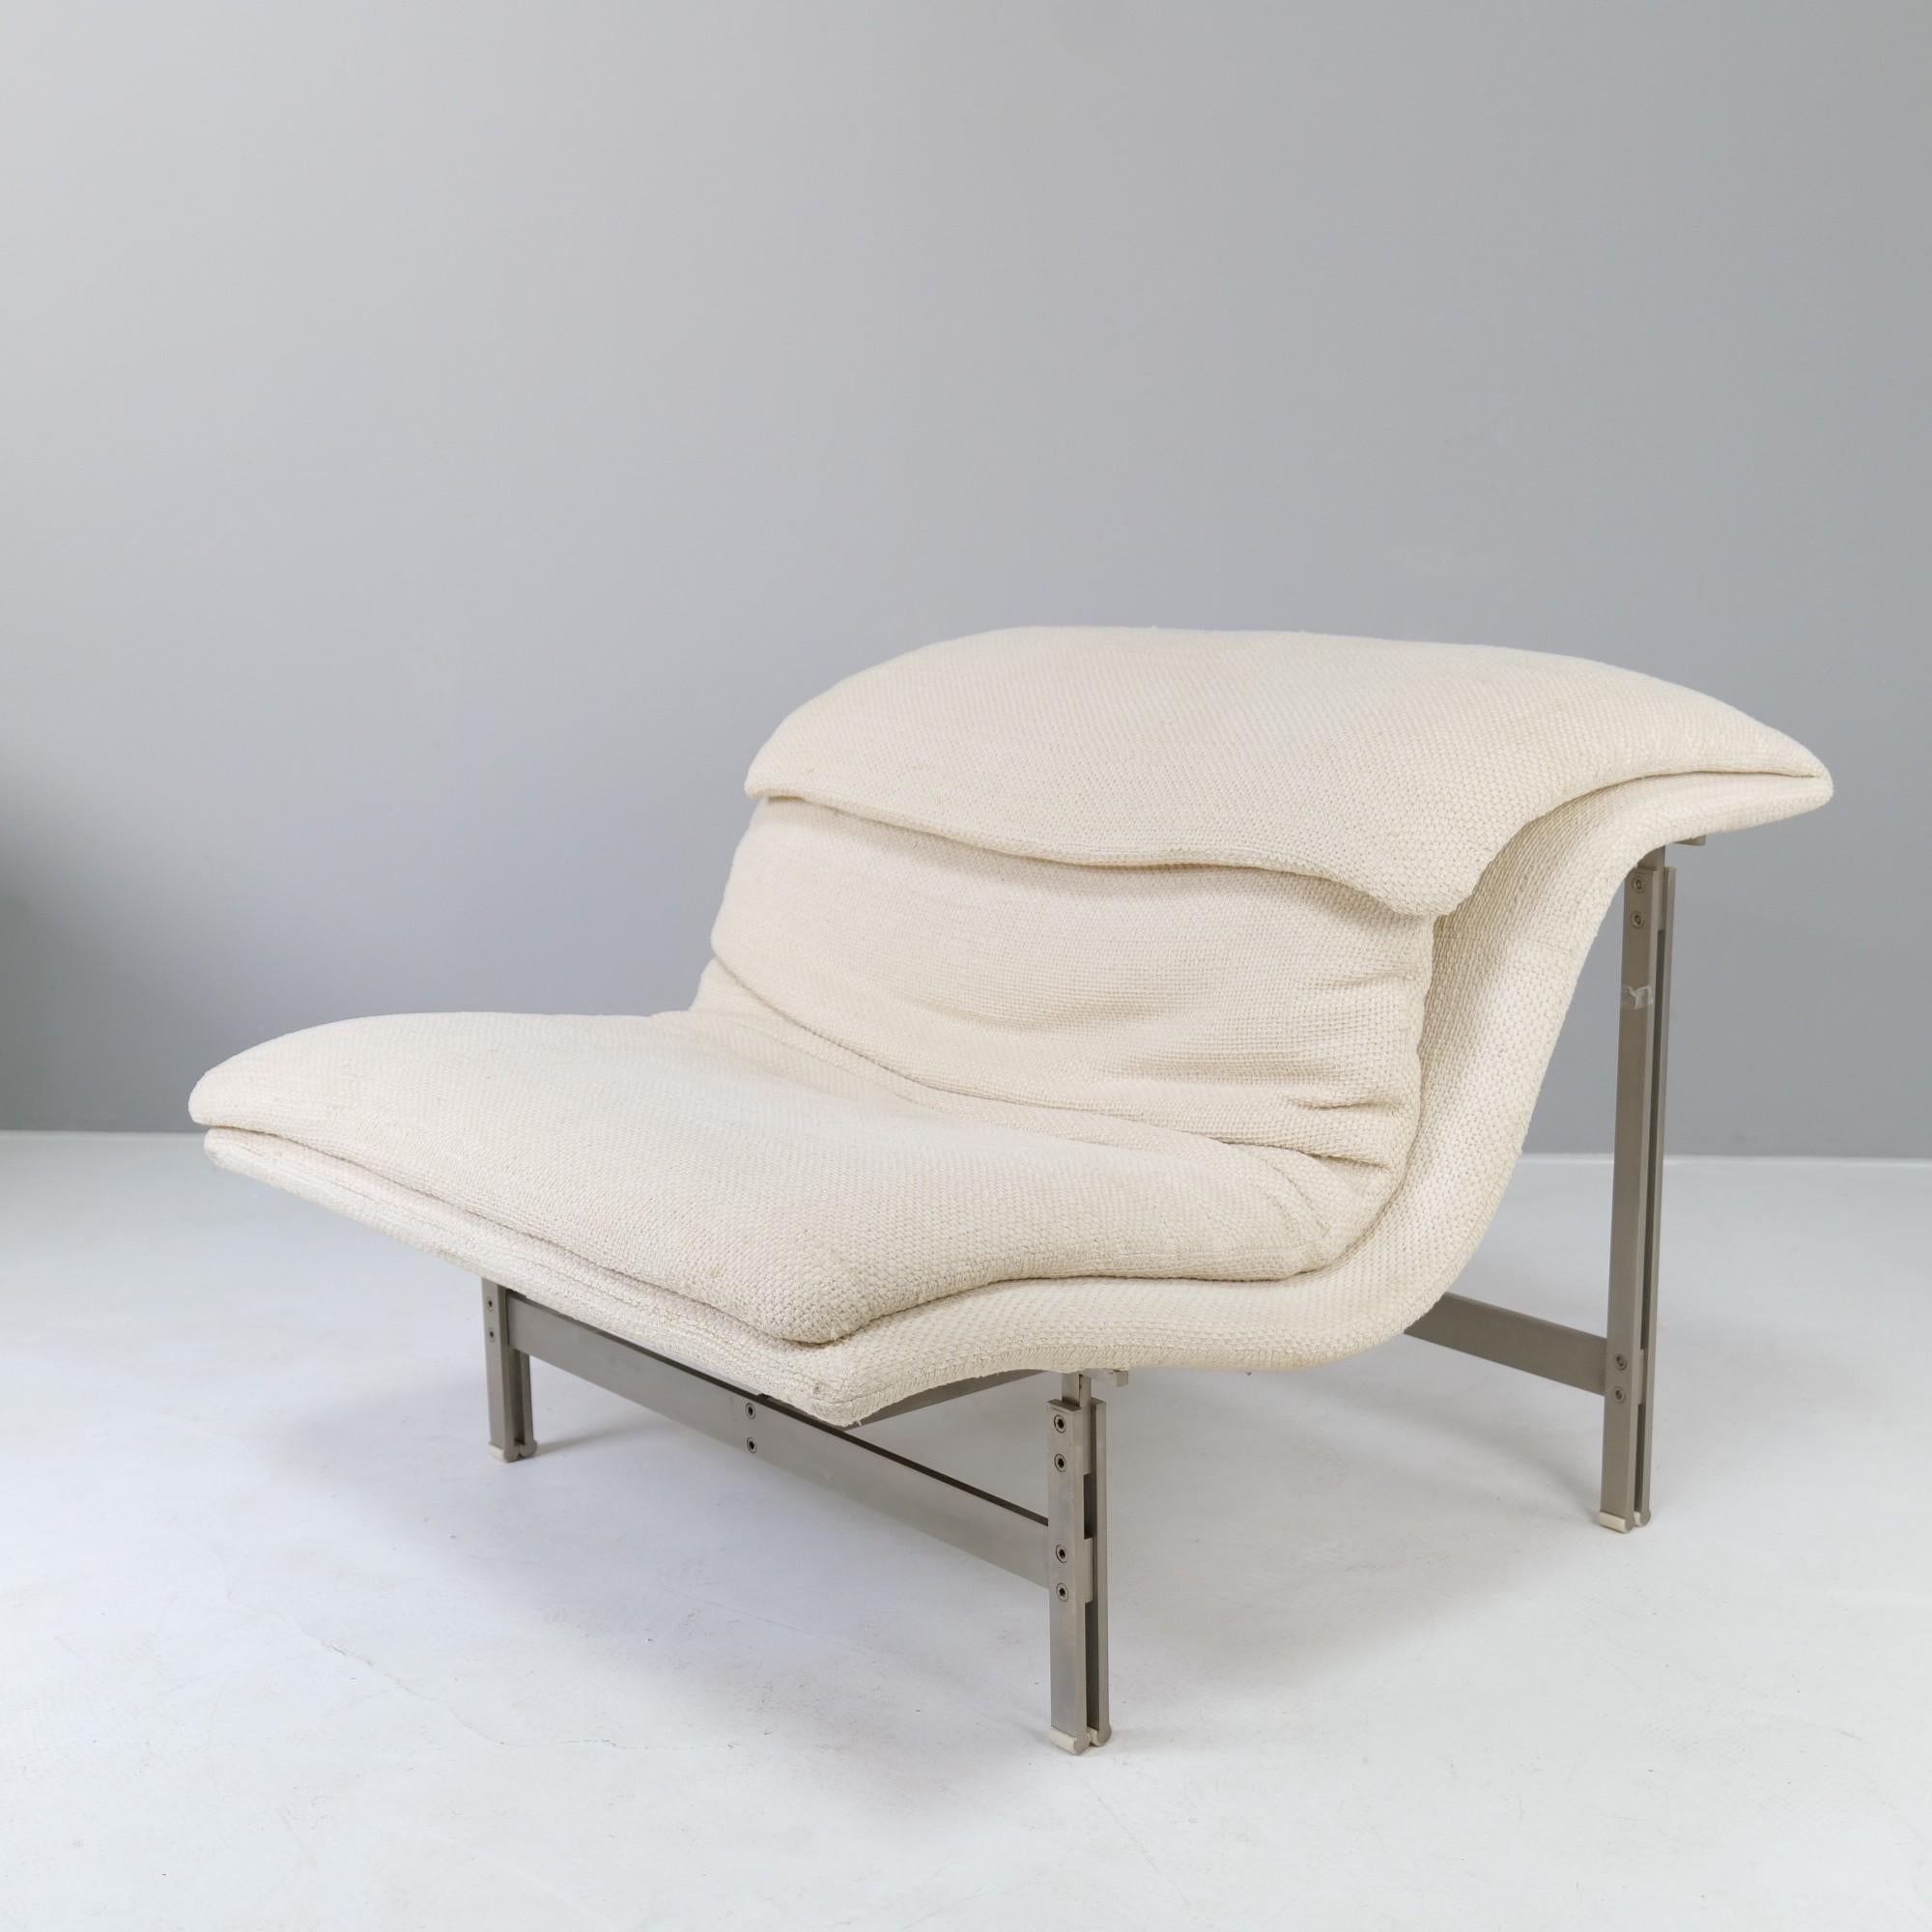 the lounge chair by Giovanni Offredi has a very comfortable seat 
The frame is made in extremely high quality workmanship. 
Signed with company logo on the underside.